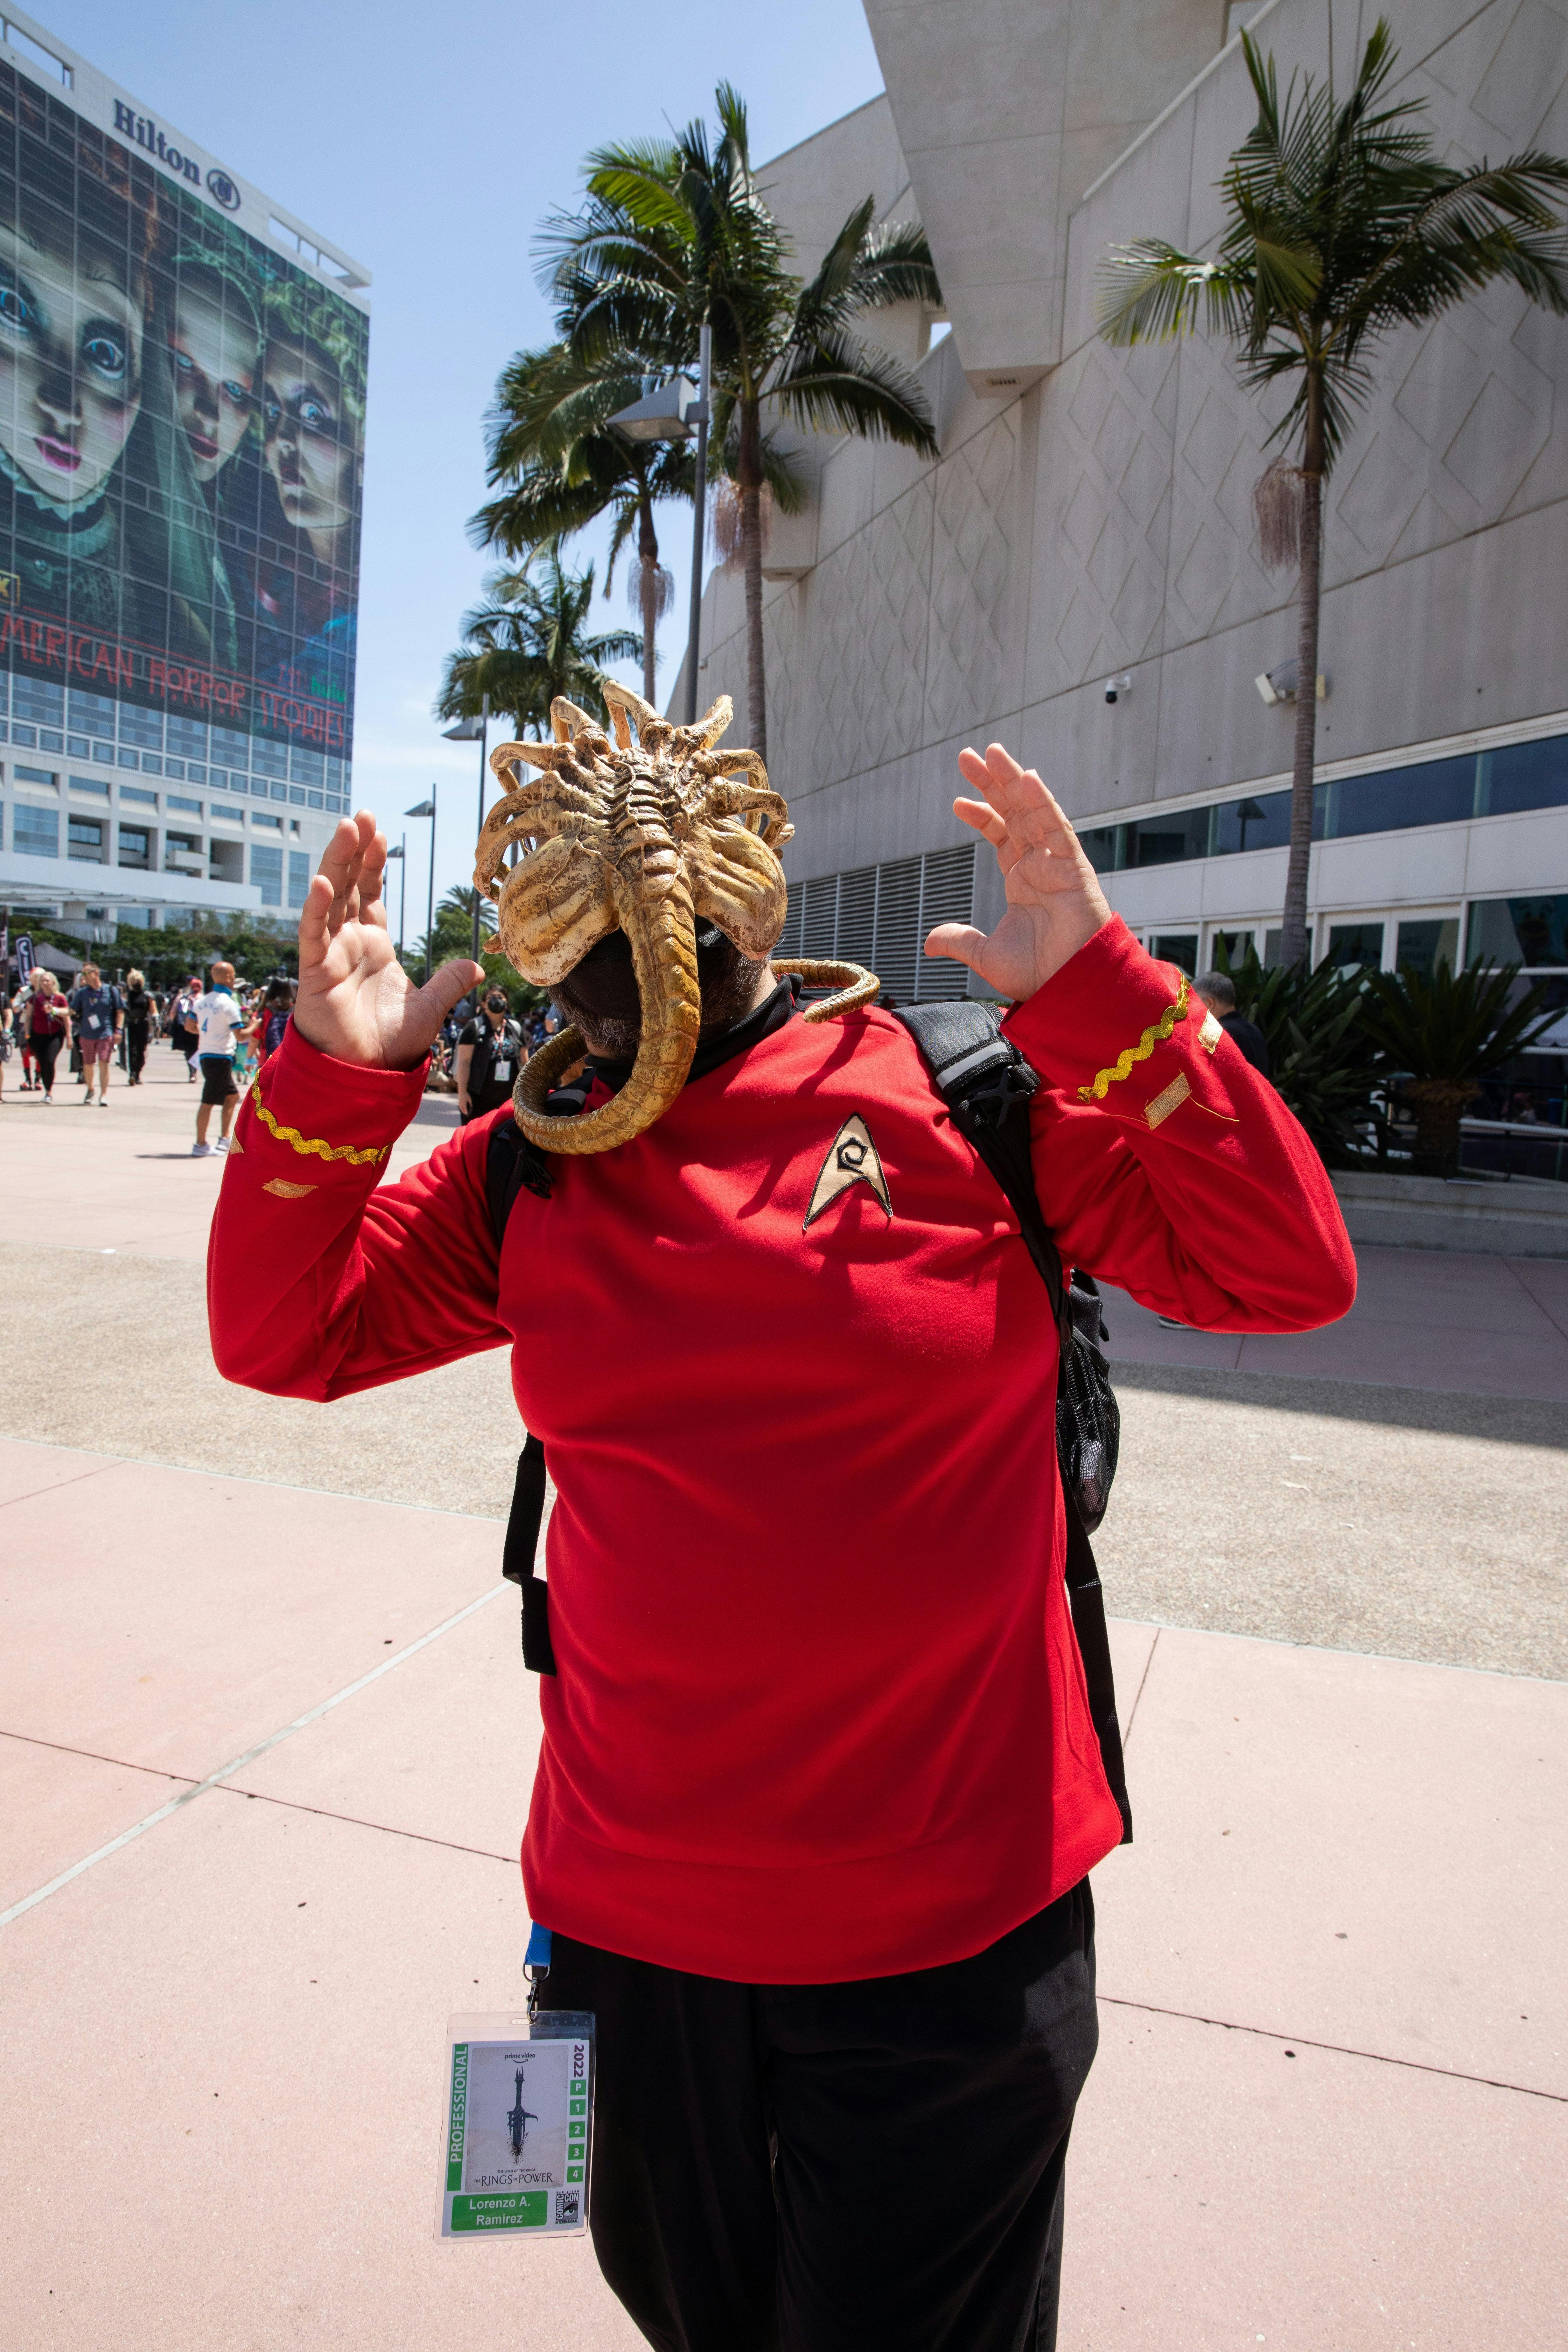 A fan dressed up as a redshirt being attacked by an alien poses for a photo.